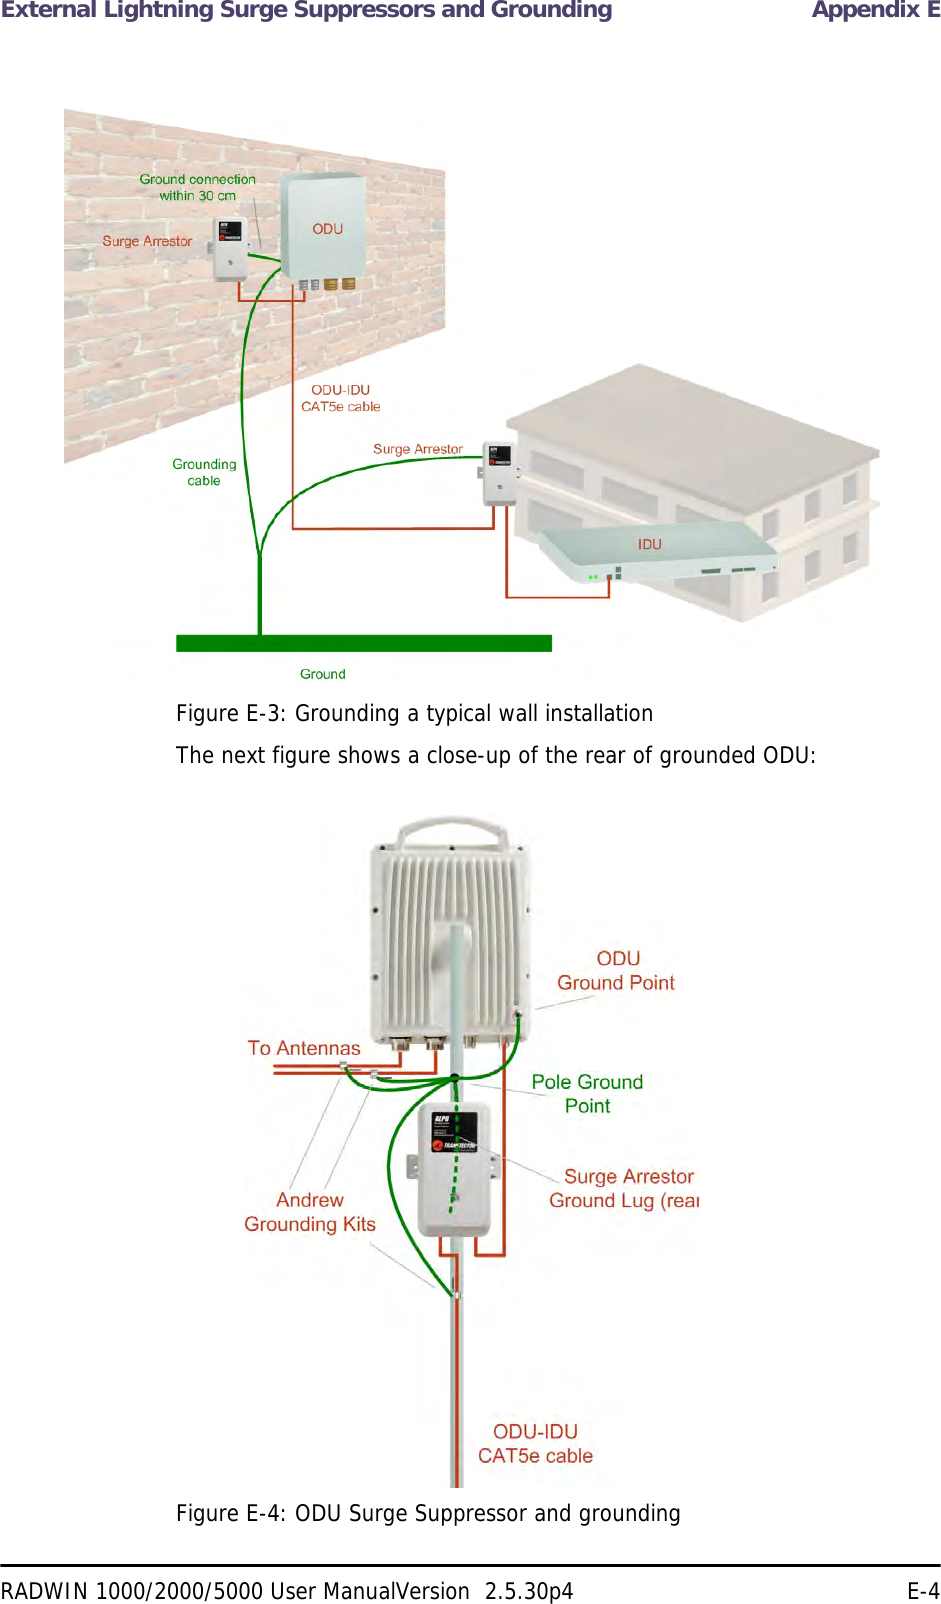 External Lightning Surge Suppressors and Grounding Appendix ERADWIN 1000/2000/5000 User ManualVersion  2.5.30p4 E-4Figure E-3: Grounding a typical wall installationThe next figure shows a close-up of the rear of grounded ODU:Figure E-4: ODU Surge Suppressor and grounding